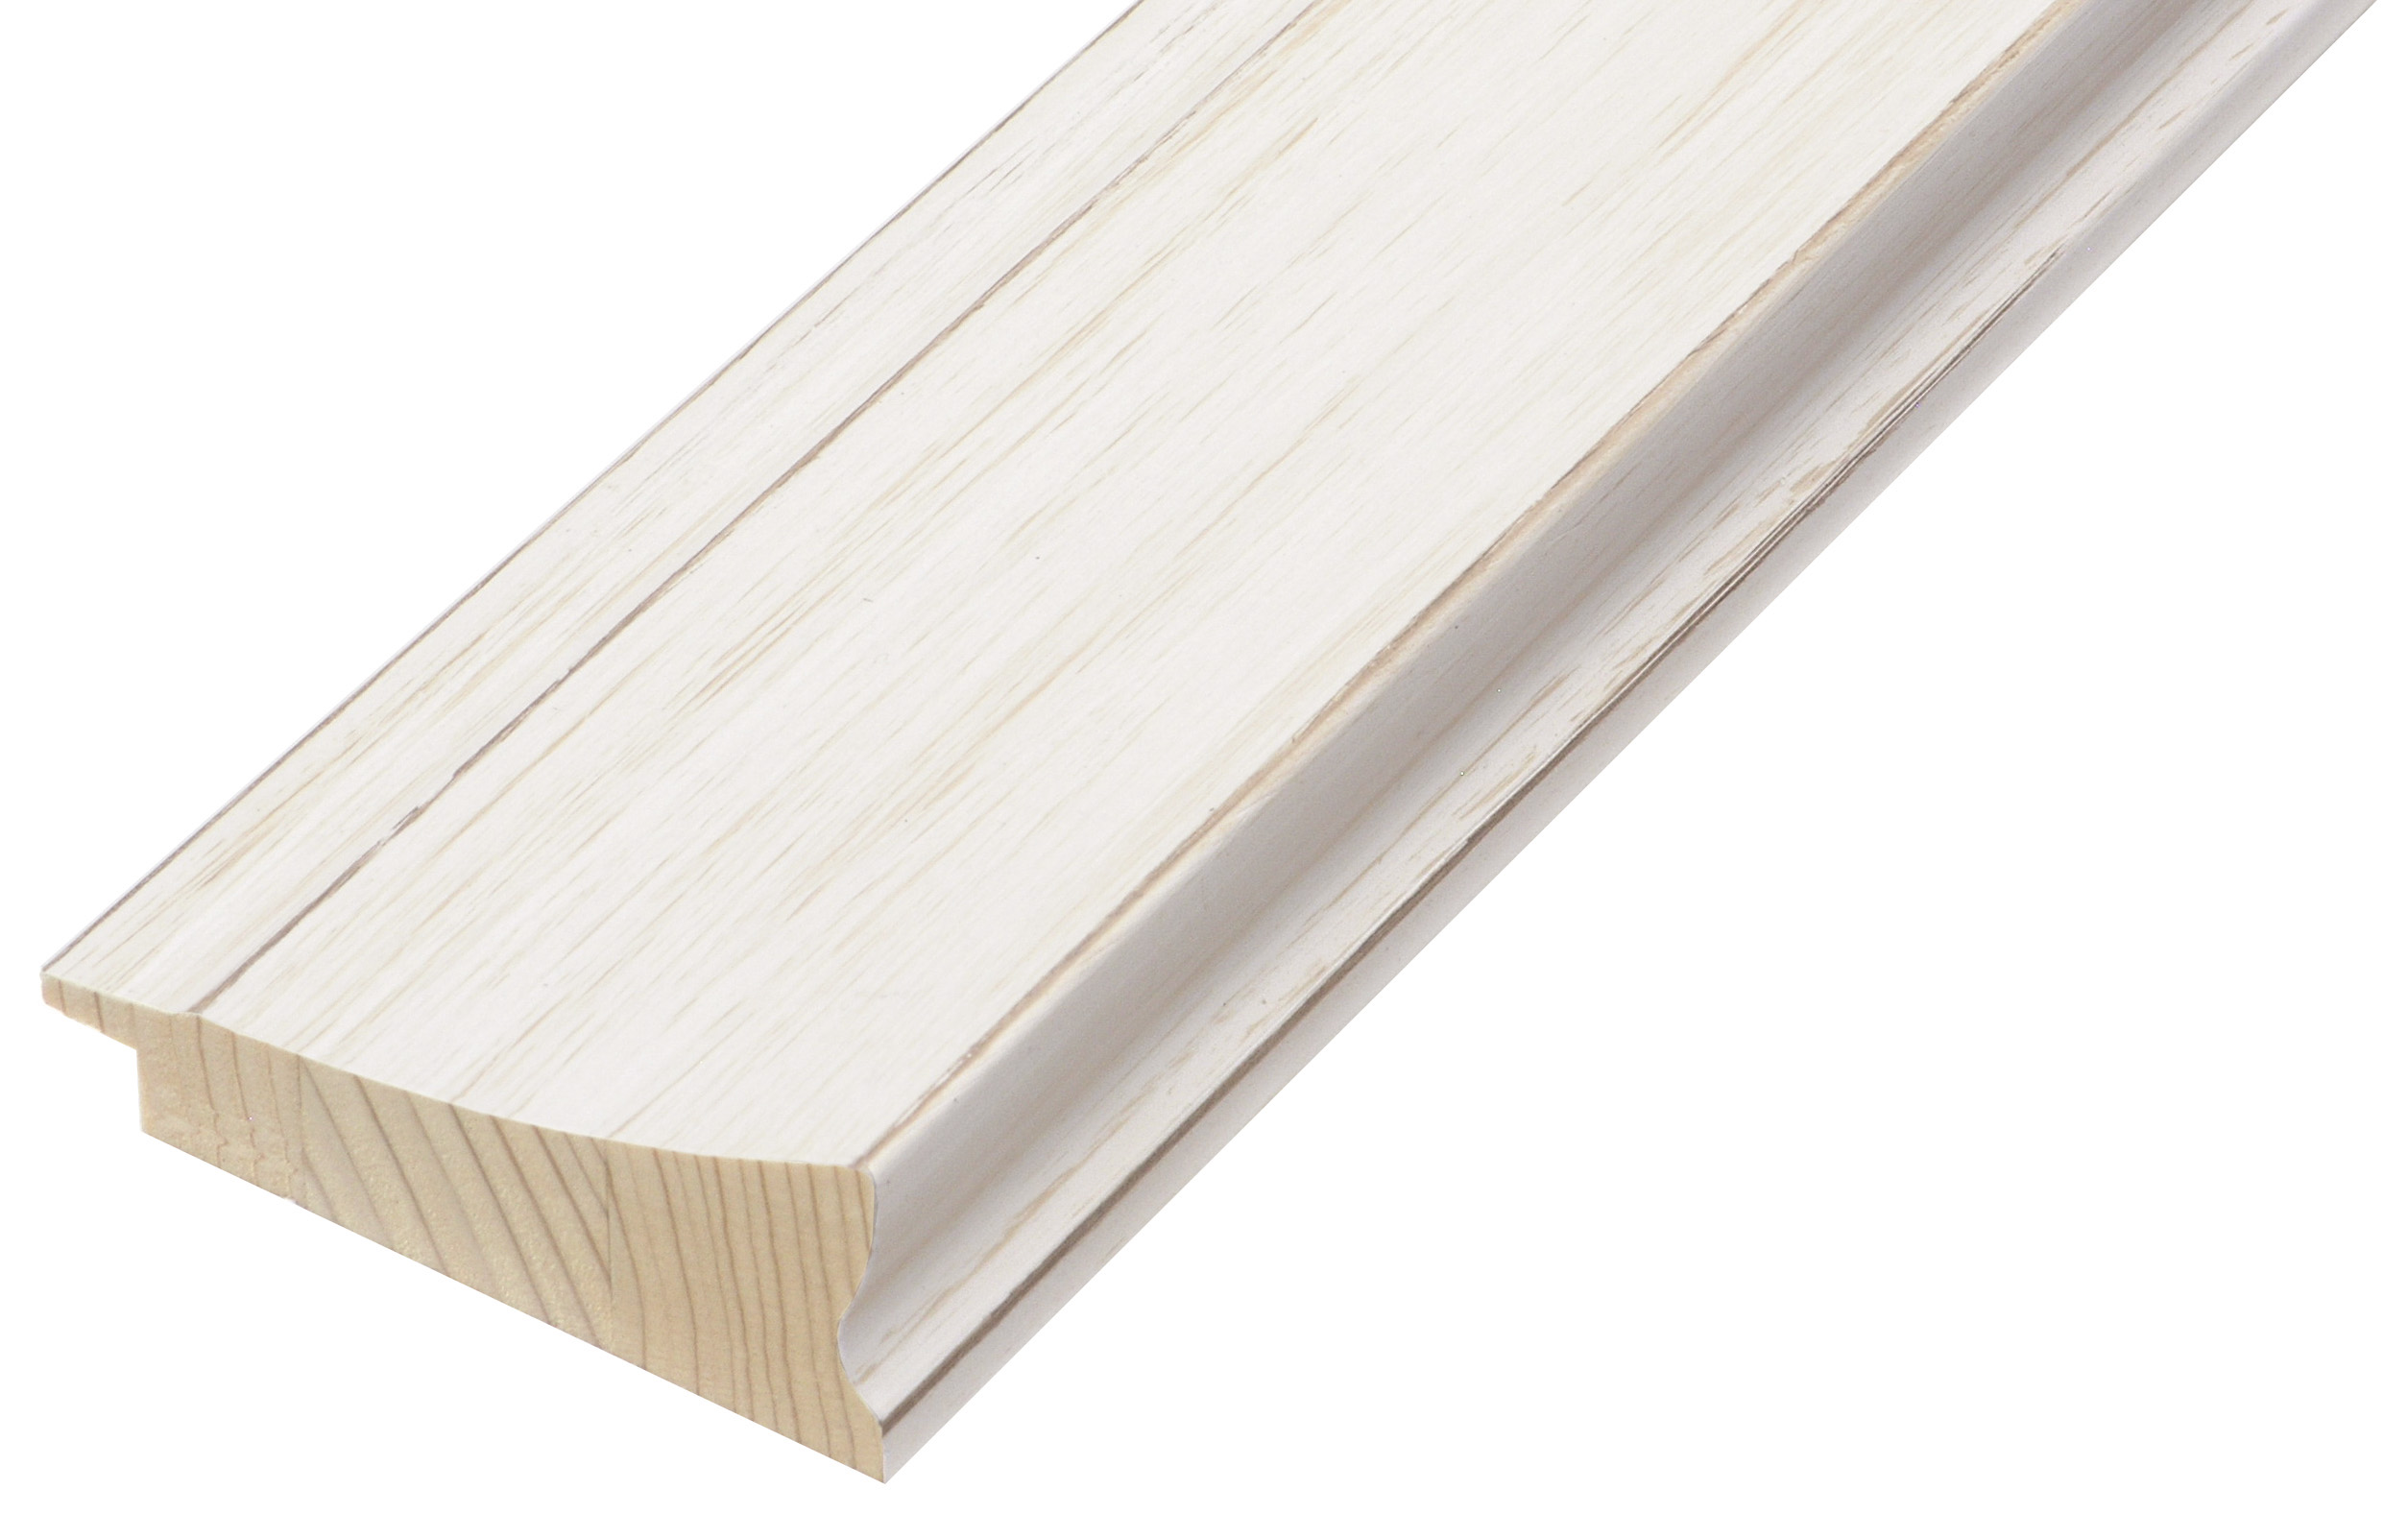 Moulding finger-jointed pine - Width 68mm - Cream finish